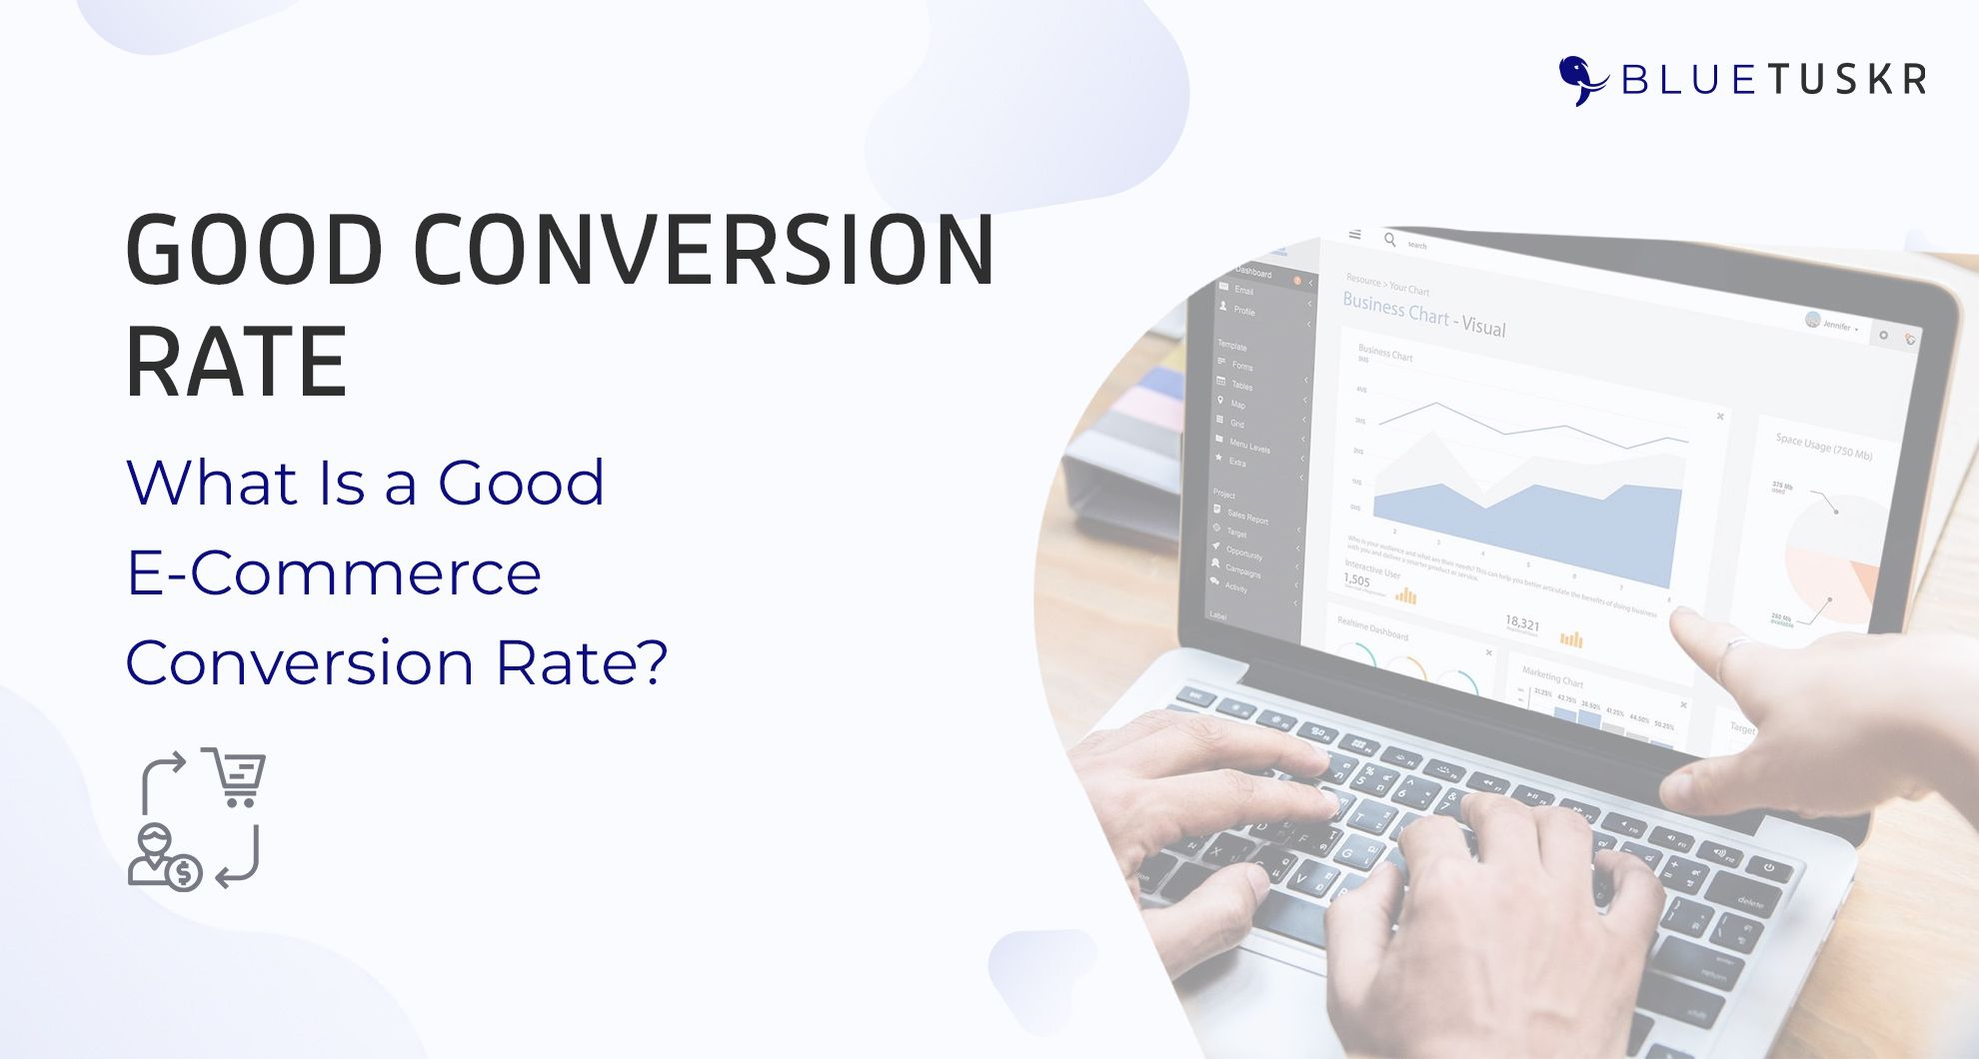 What Is a Good E-Commerce Conversion Rate?